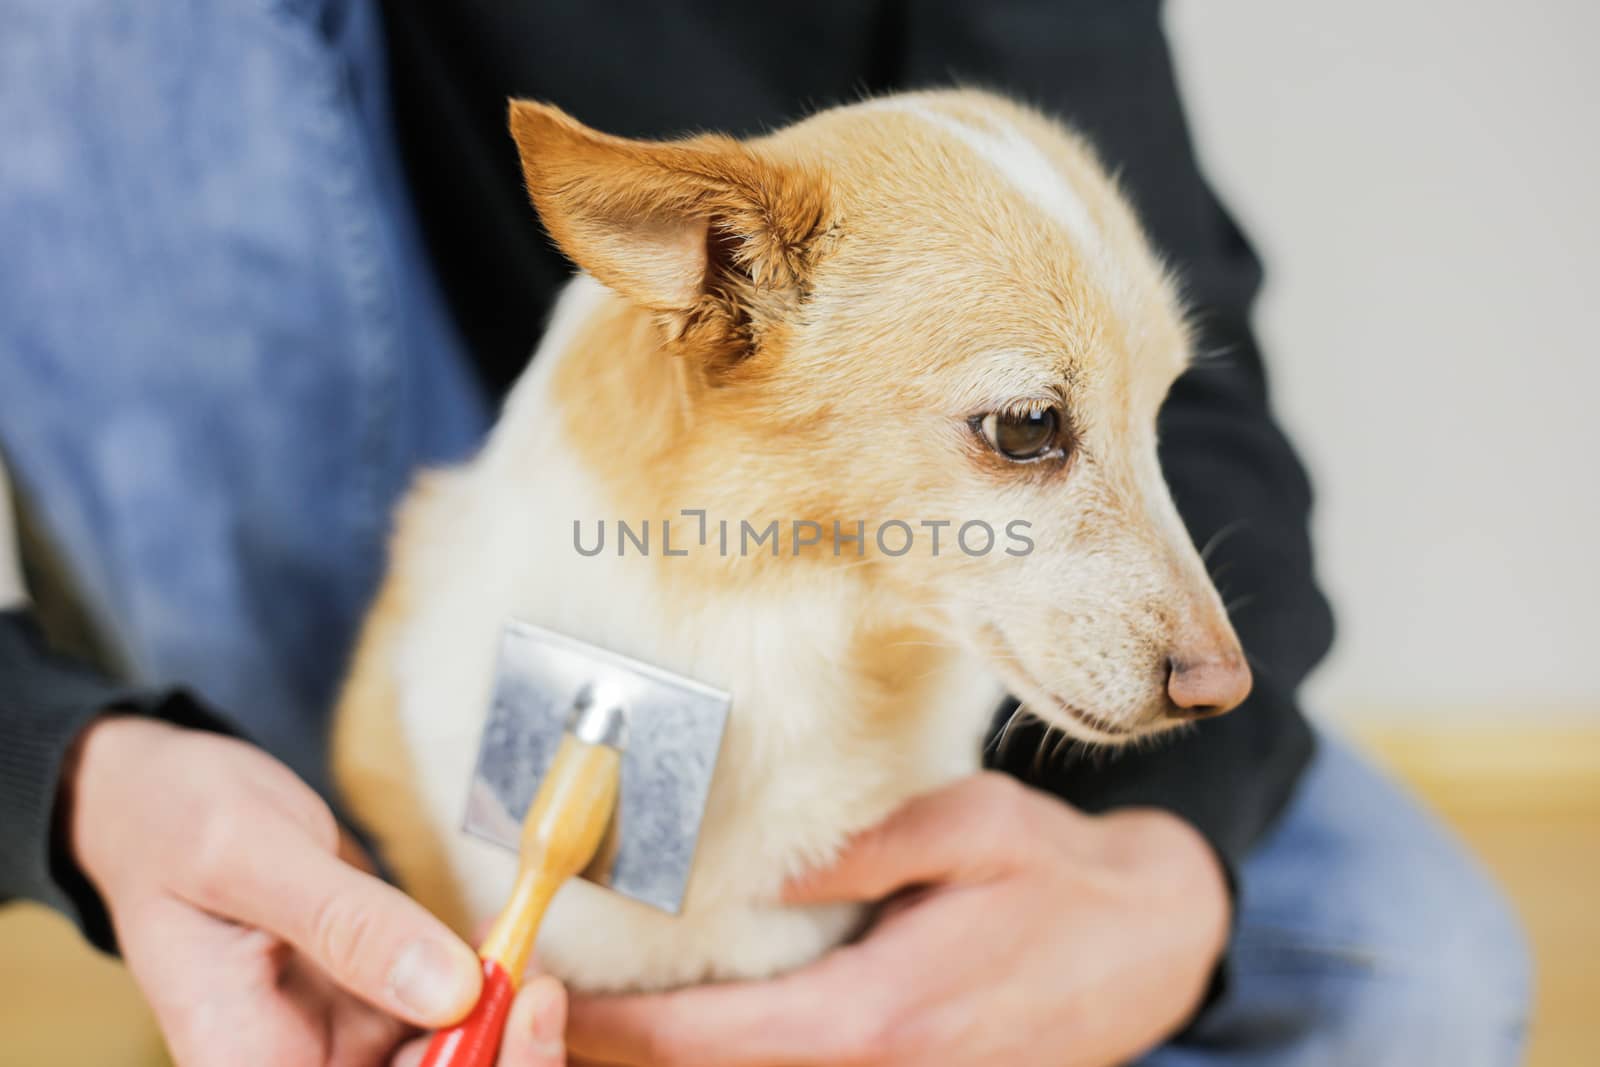 Combing a dog’s coat. Dog hairstyle. Pet care